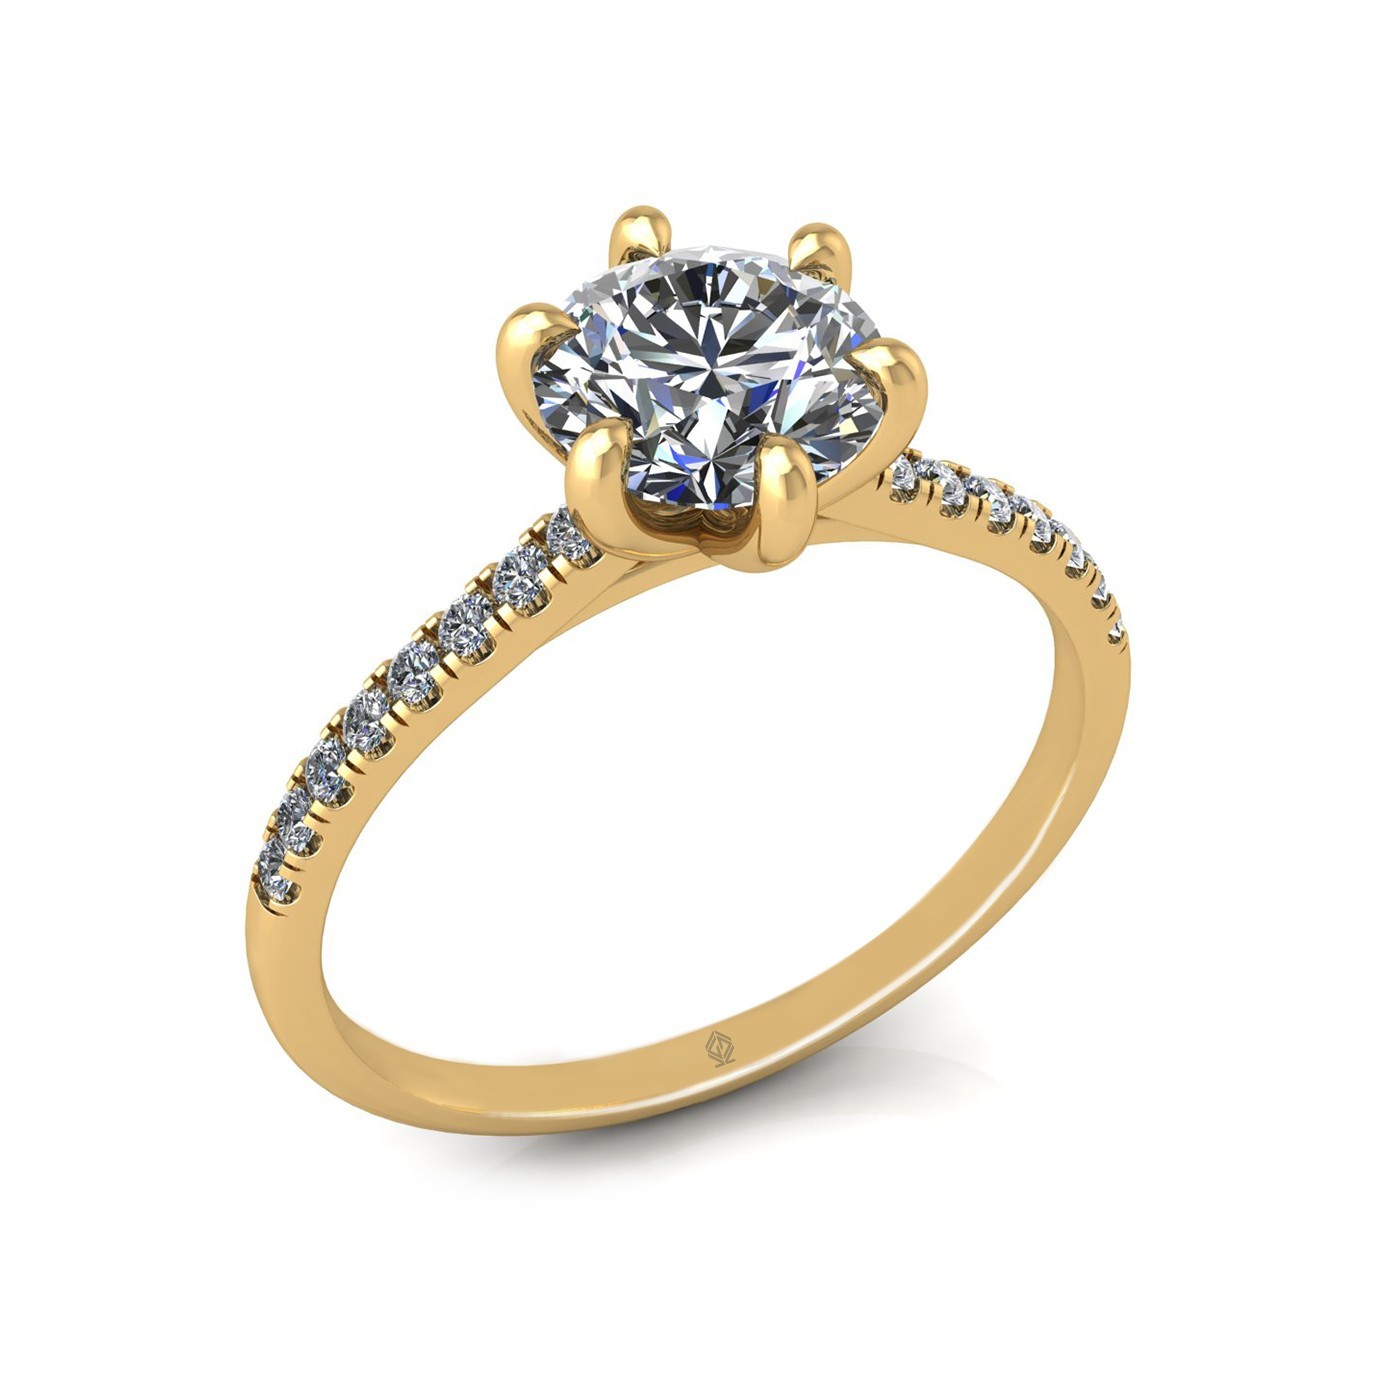 18K YELLOW GOLD 6 PRONGS ROUND CUT DIAMOND ENGAGEMENT RING WITH WHISPER THIN PAVÉ SET BAND